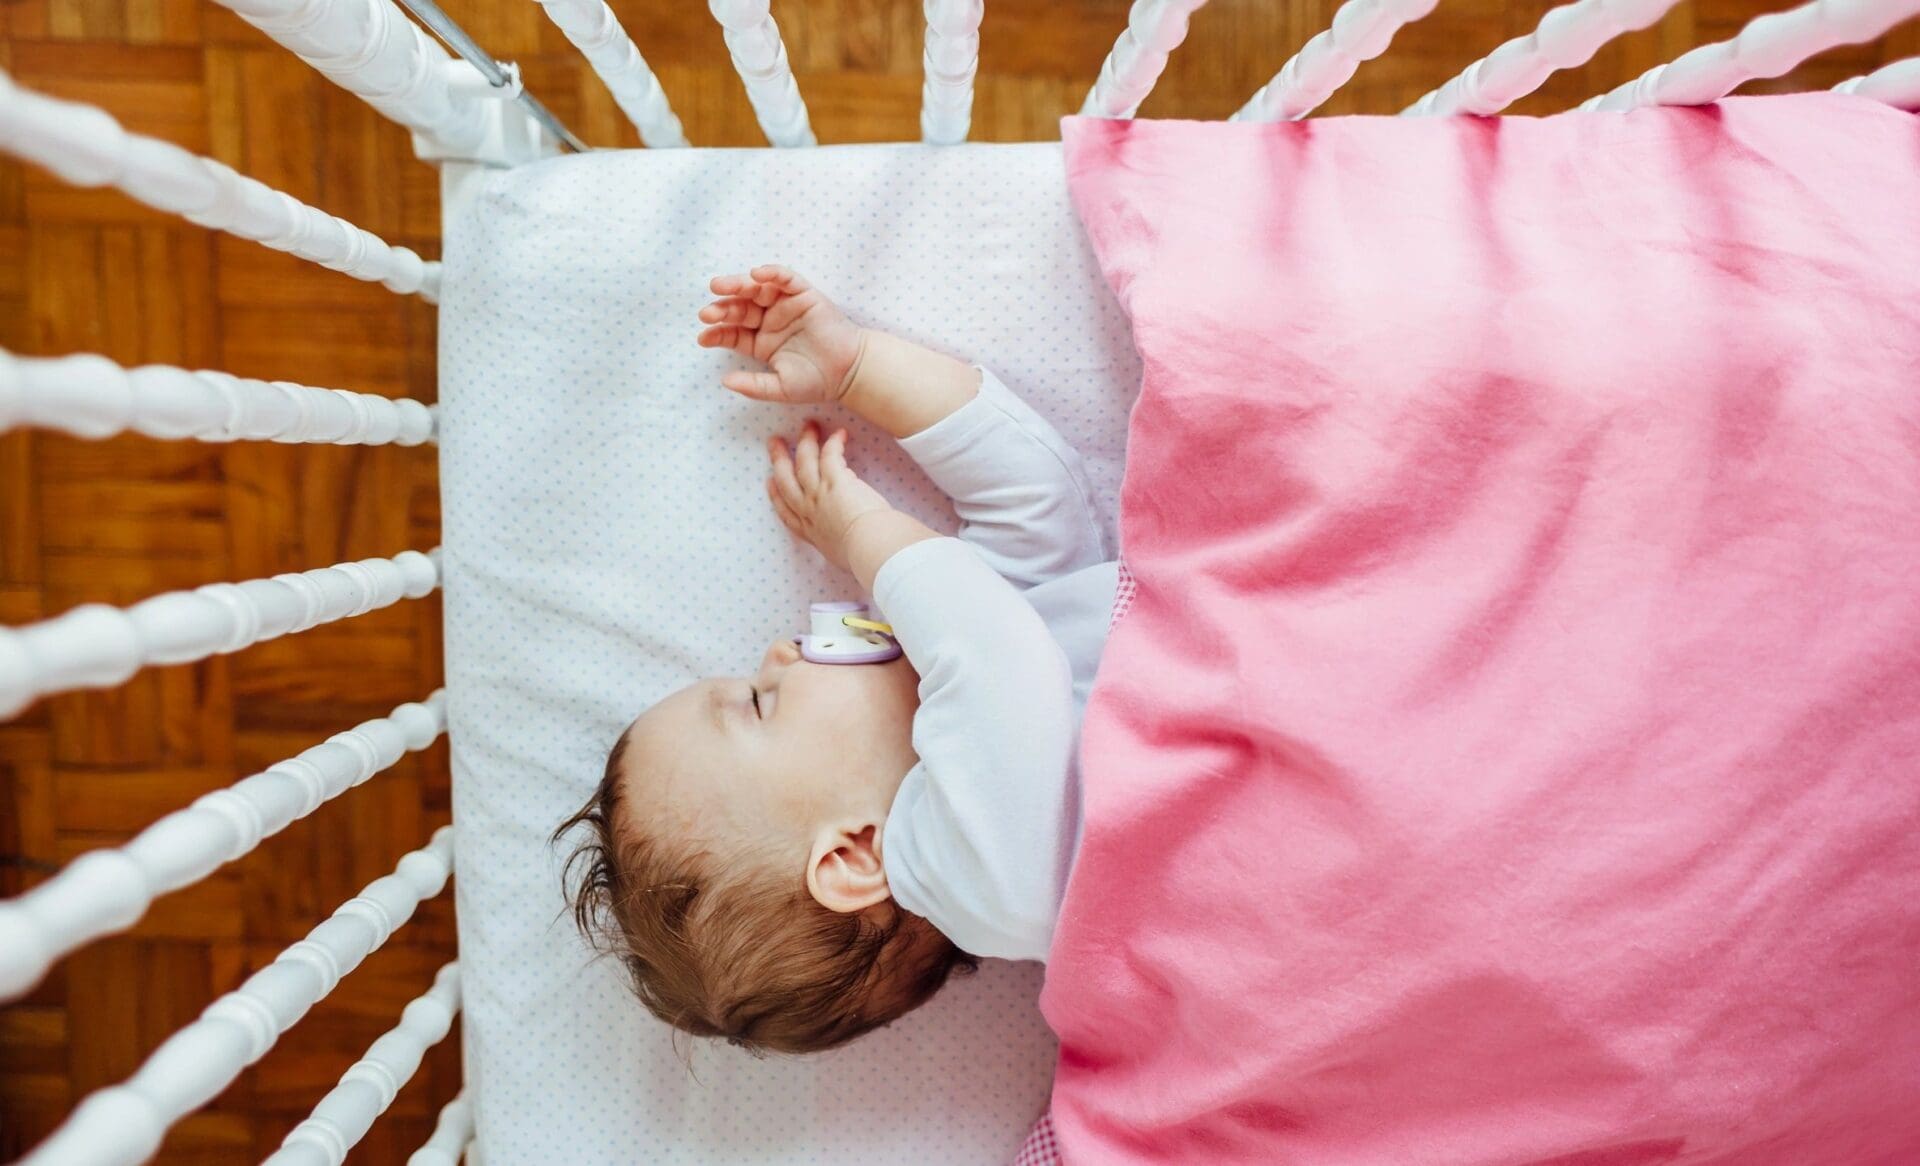 A baby sleeping in a crib with a pink blanket.